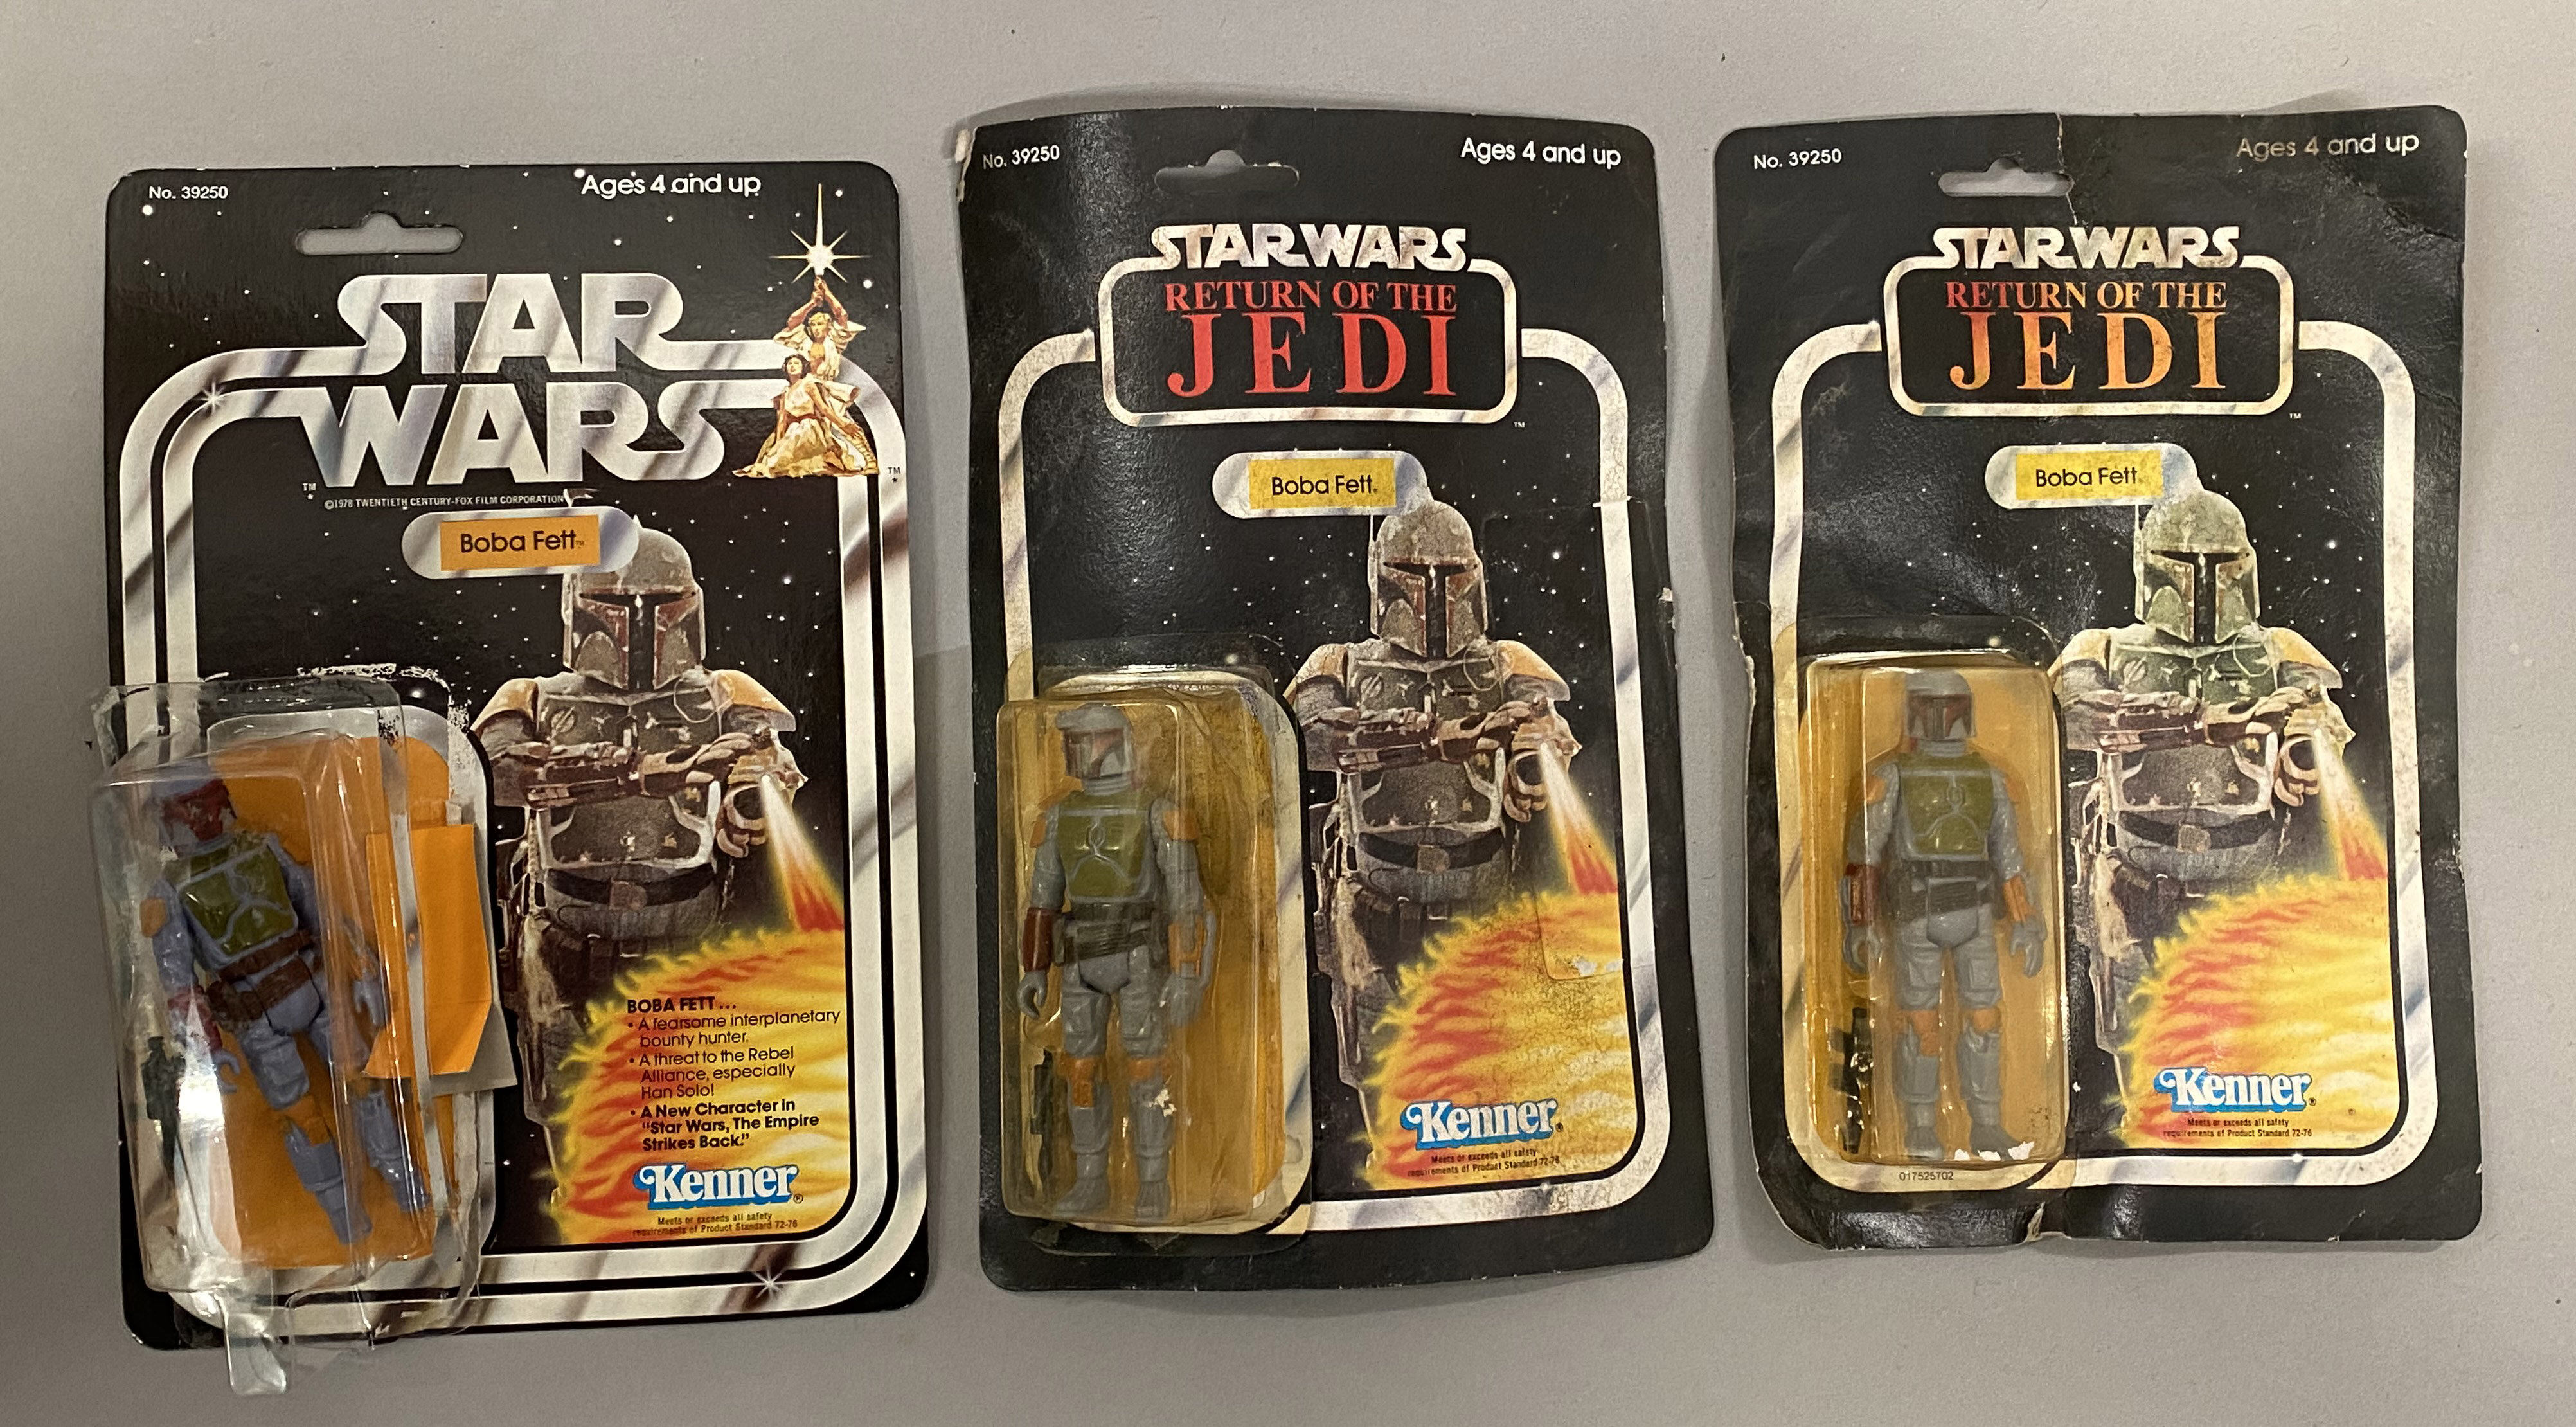 3 Star Wars Boba Fett figures - one is sealed on a Kenner ROTJ card but the card is AF, the other tw